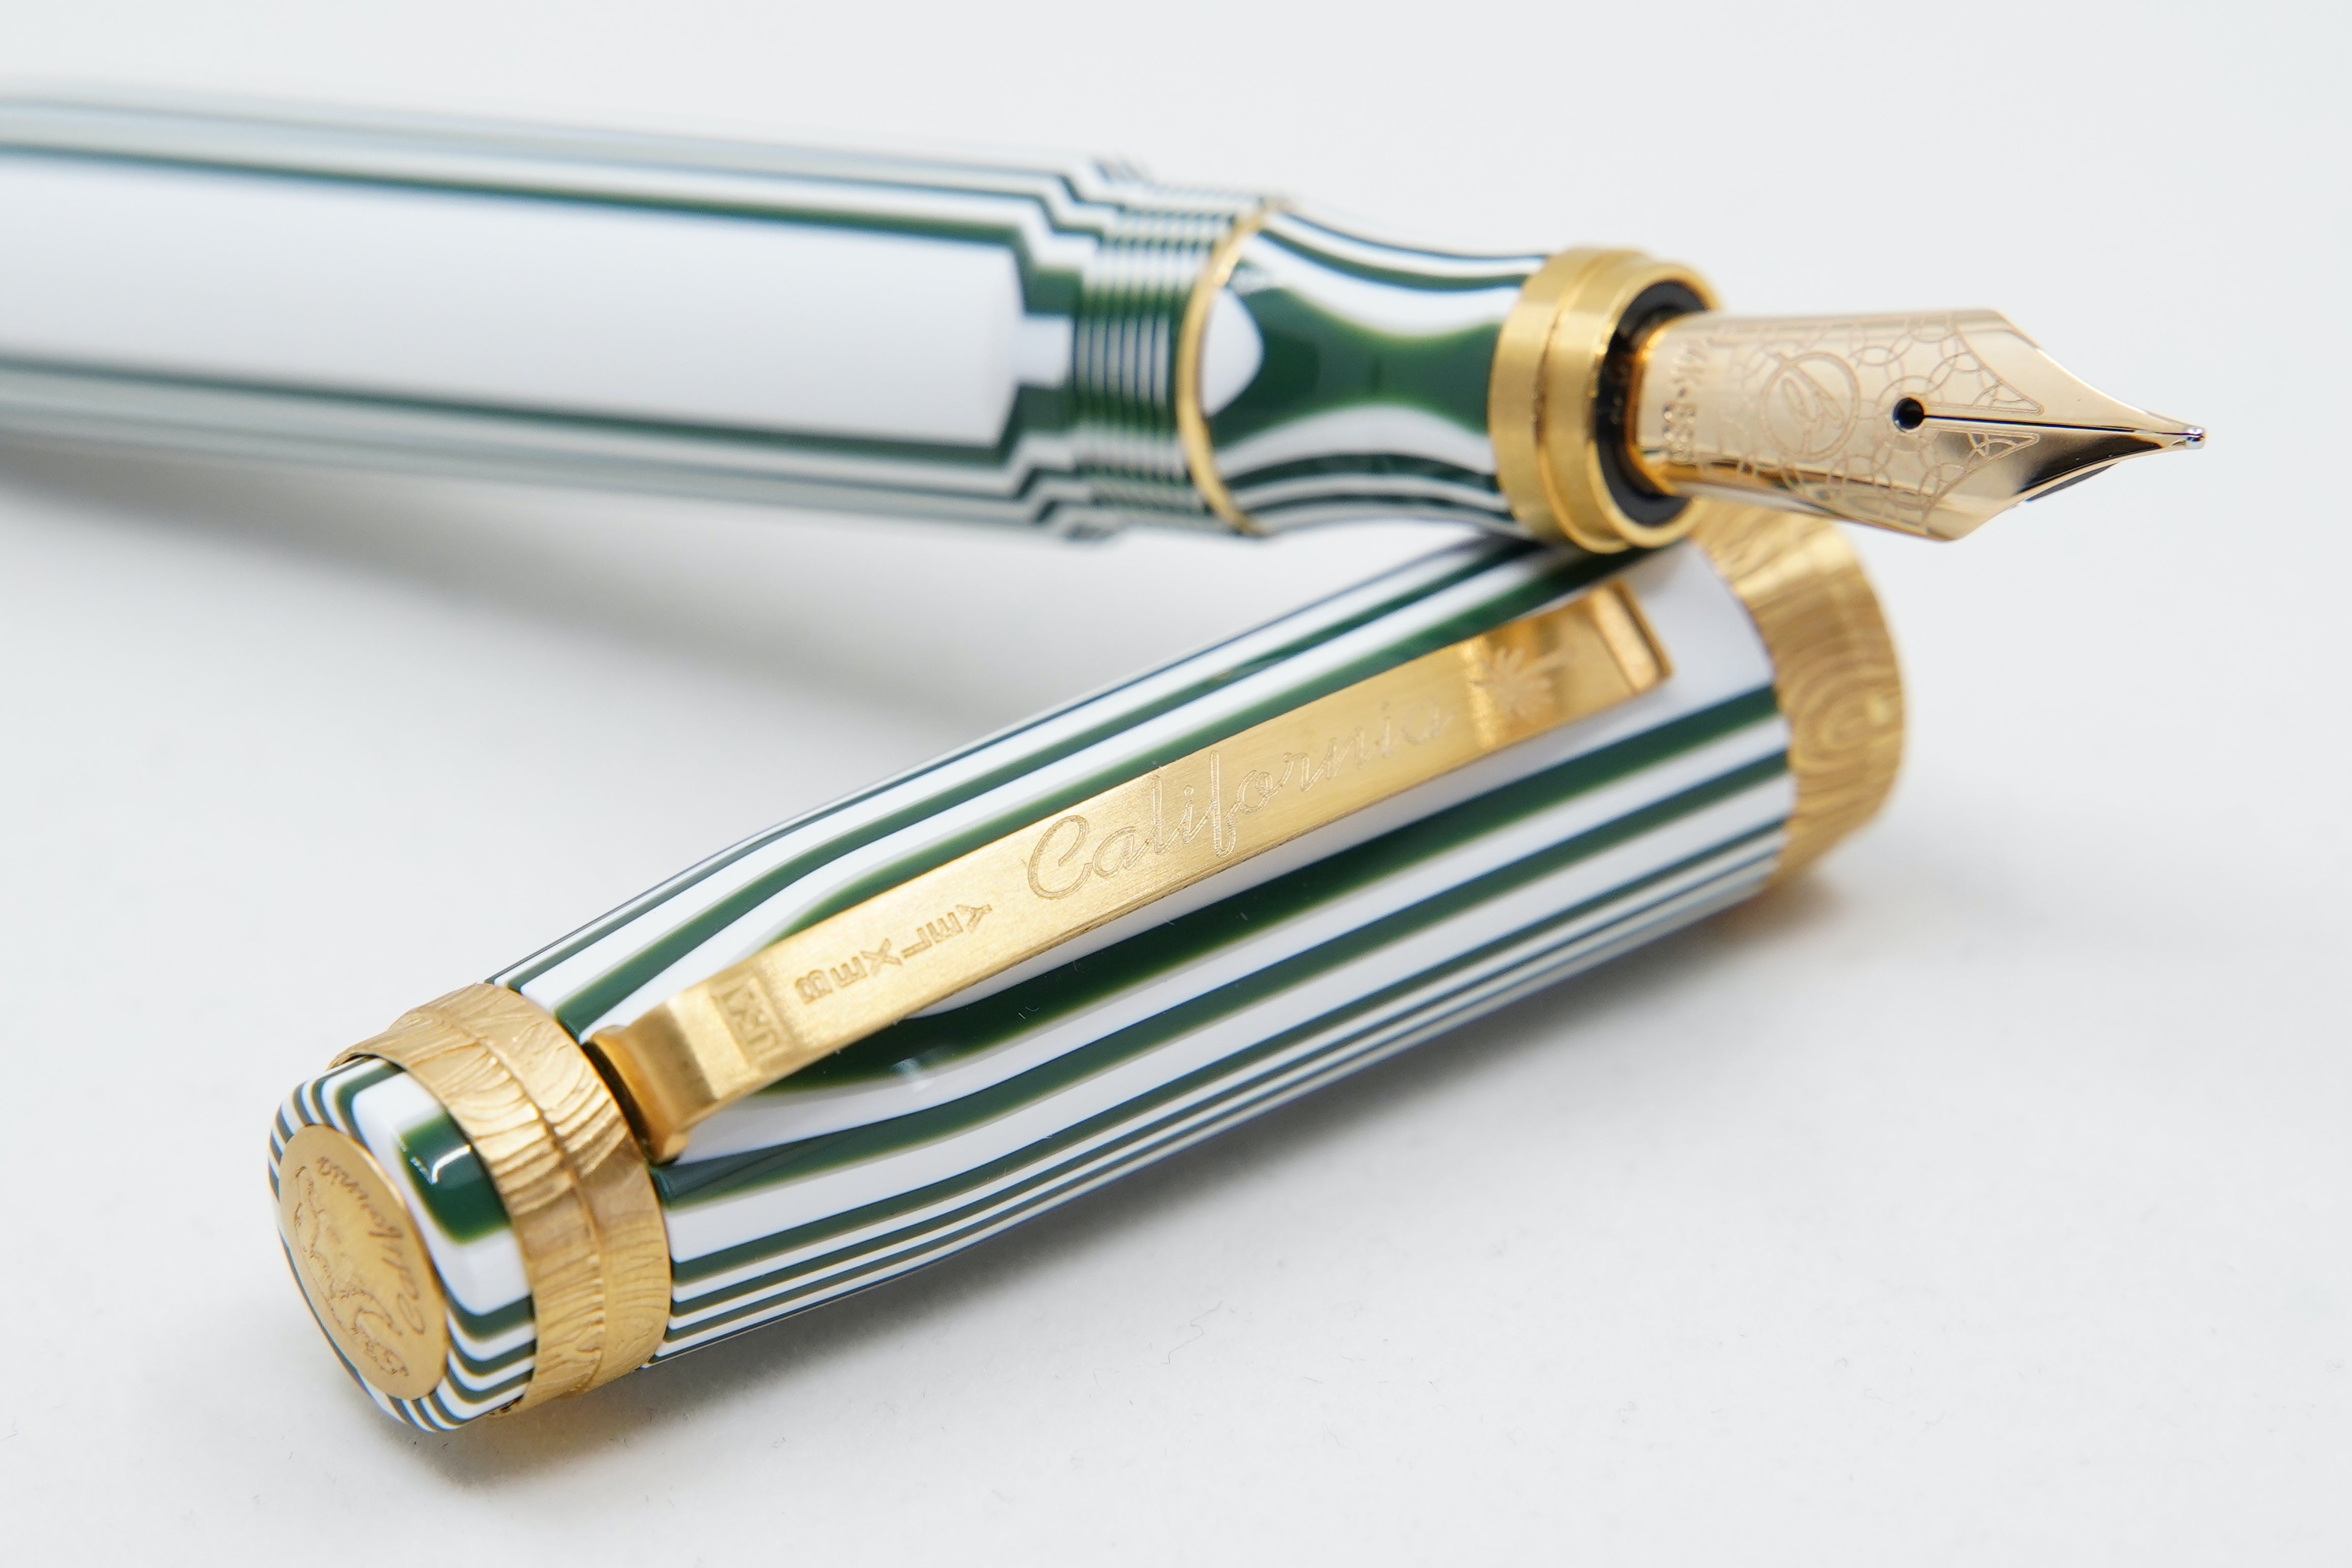 NEW! Bexley California Gold Trim Limited Edition of 50 Pens